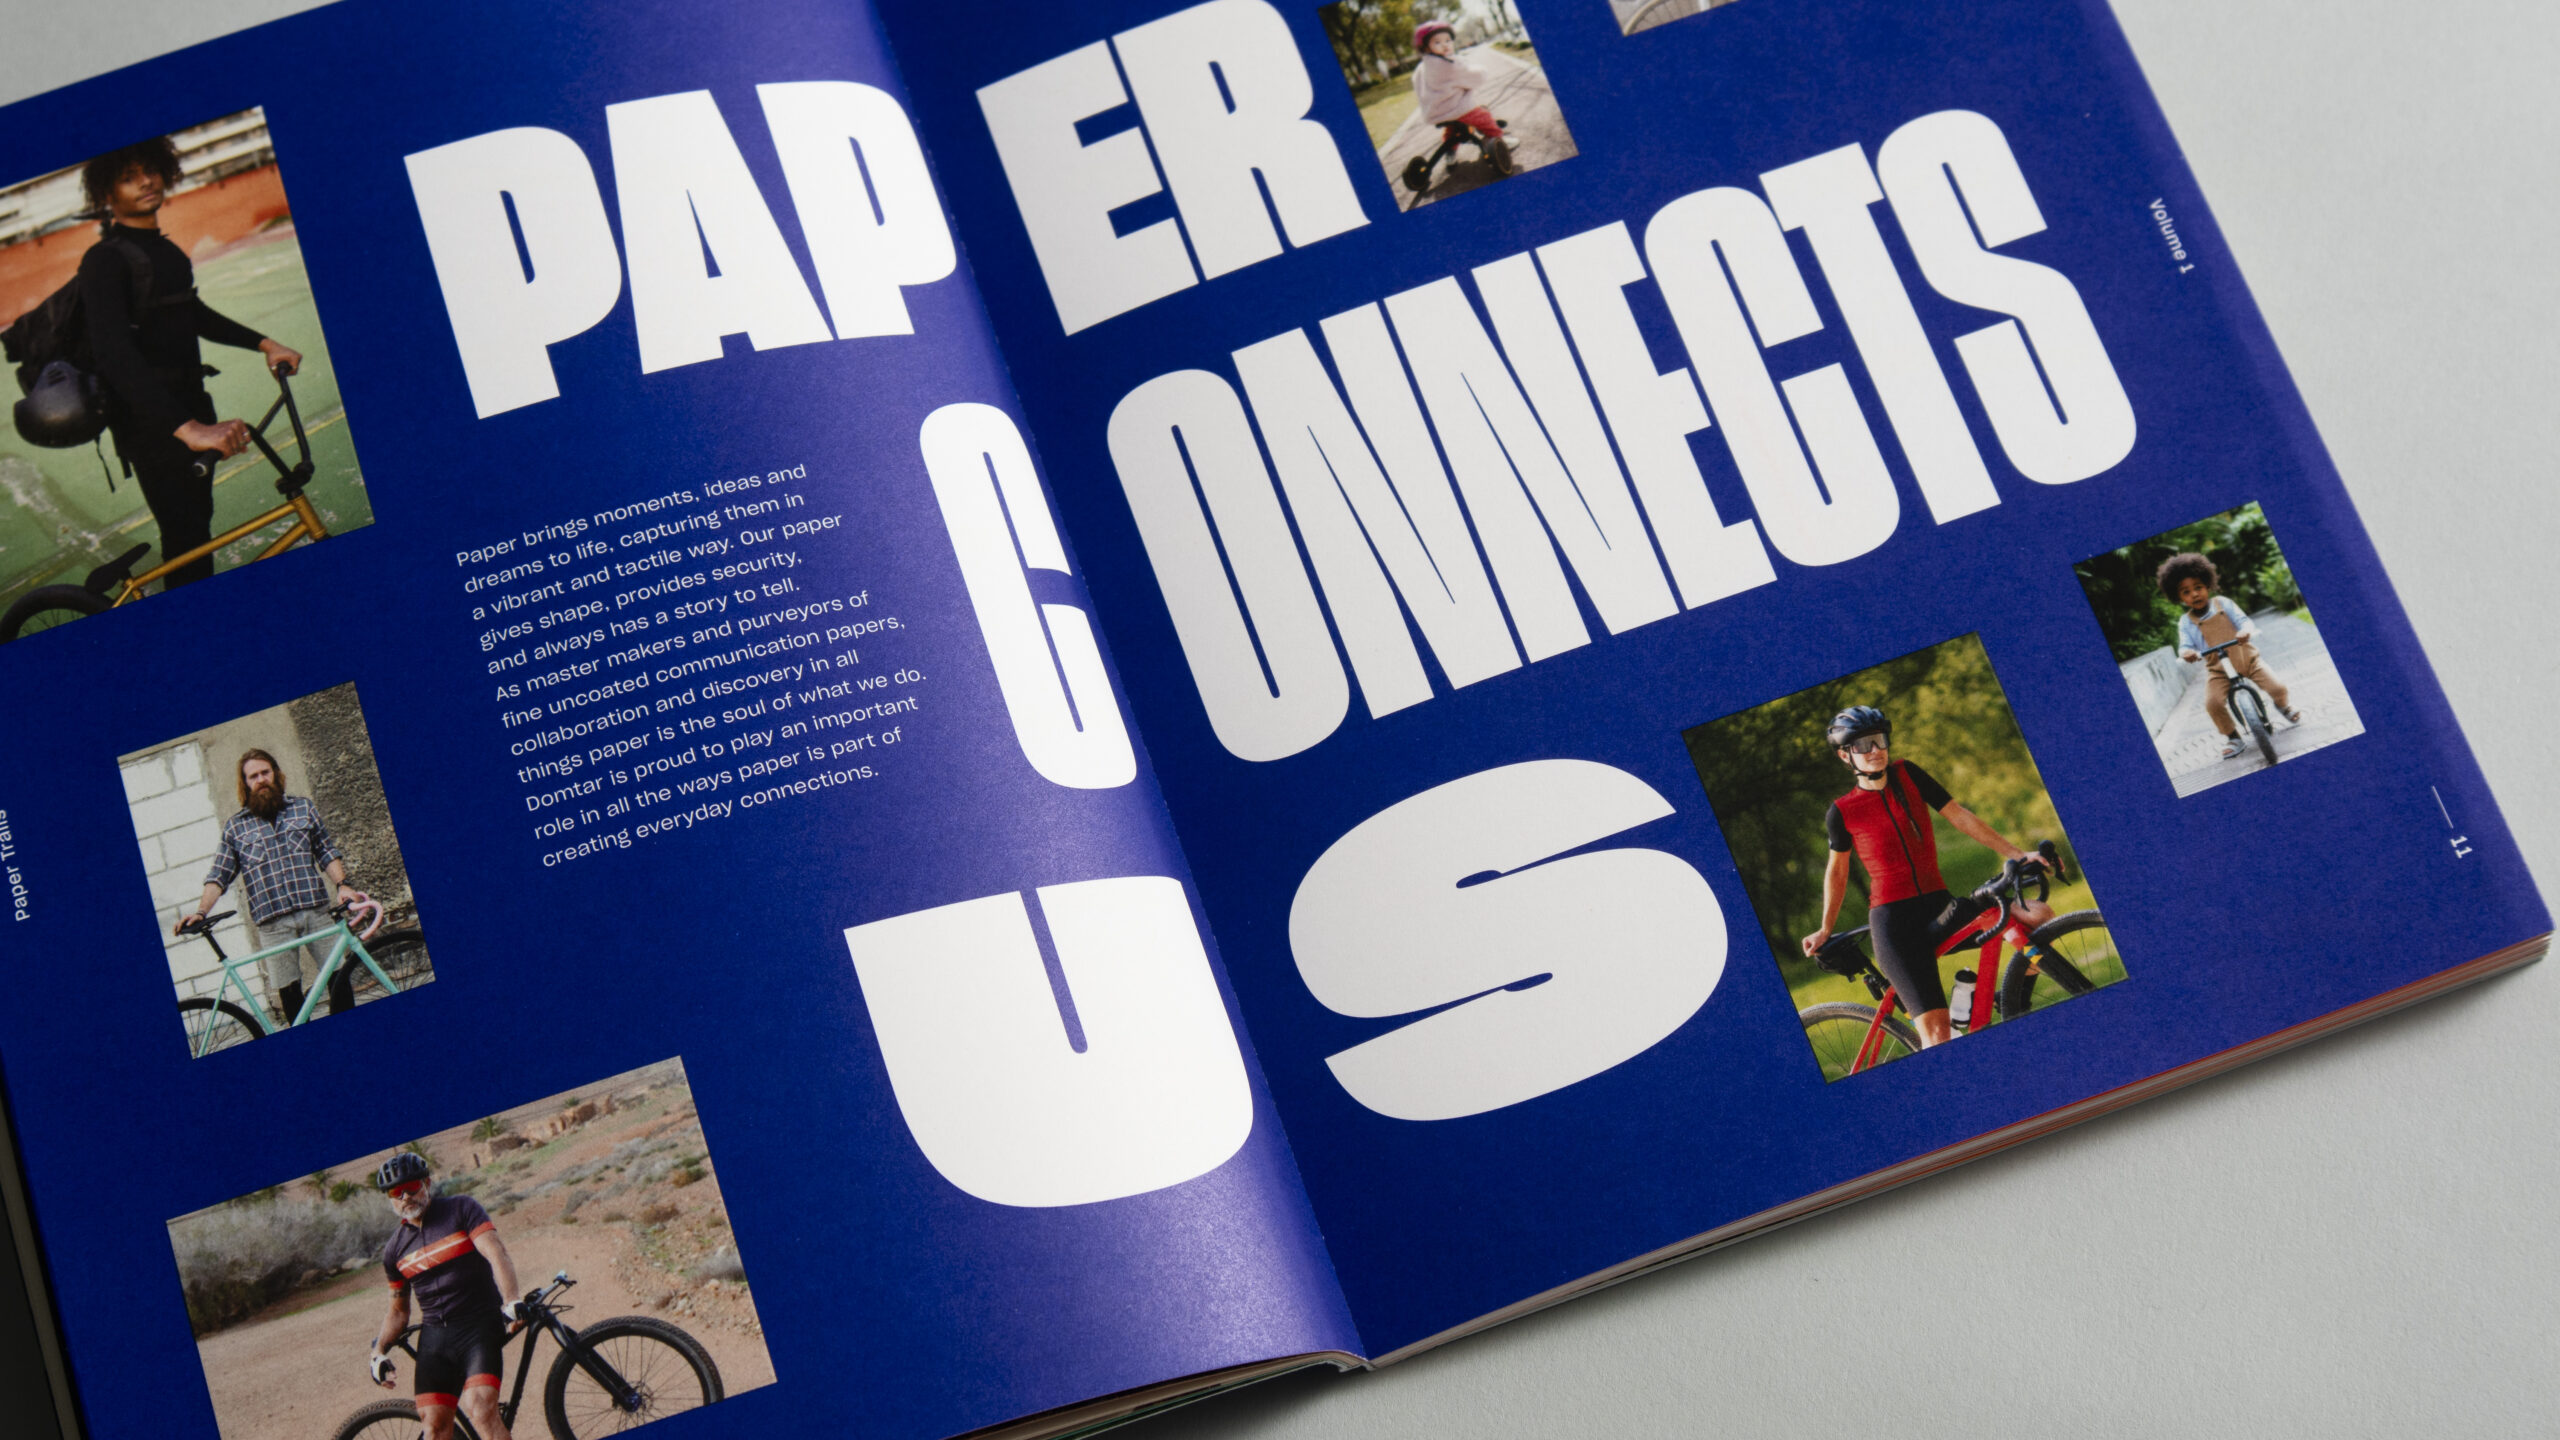 Cougar Paper Trails printing primer helps creatives choose the right paper for the job.